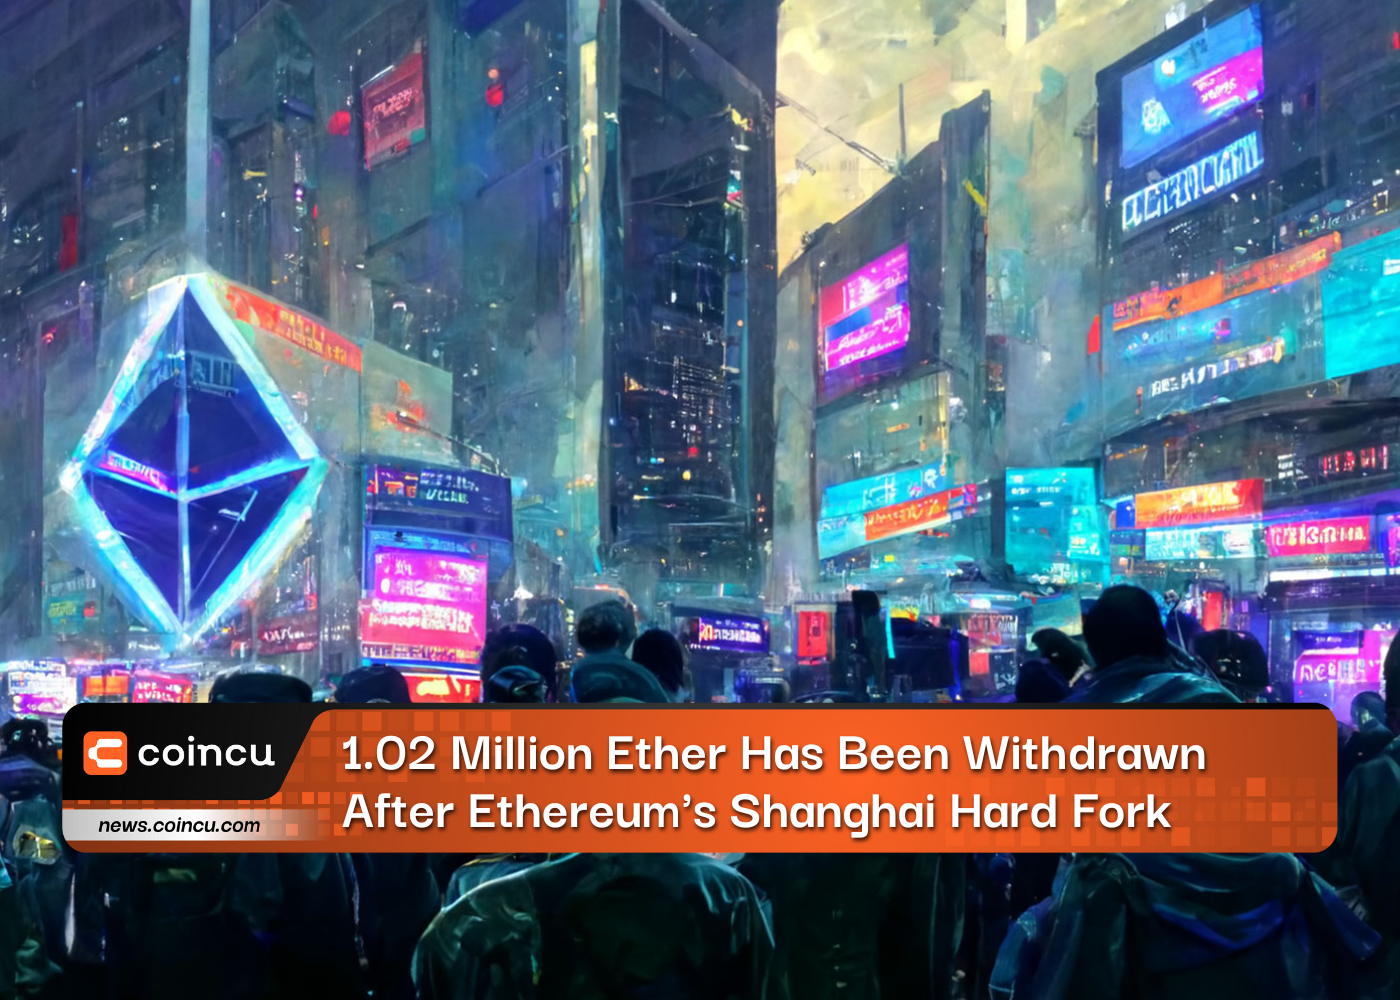 1.02 Million Ether Has Been Withdrawn After Ethereum's Shanghai Hard Fork